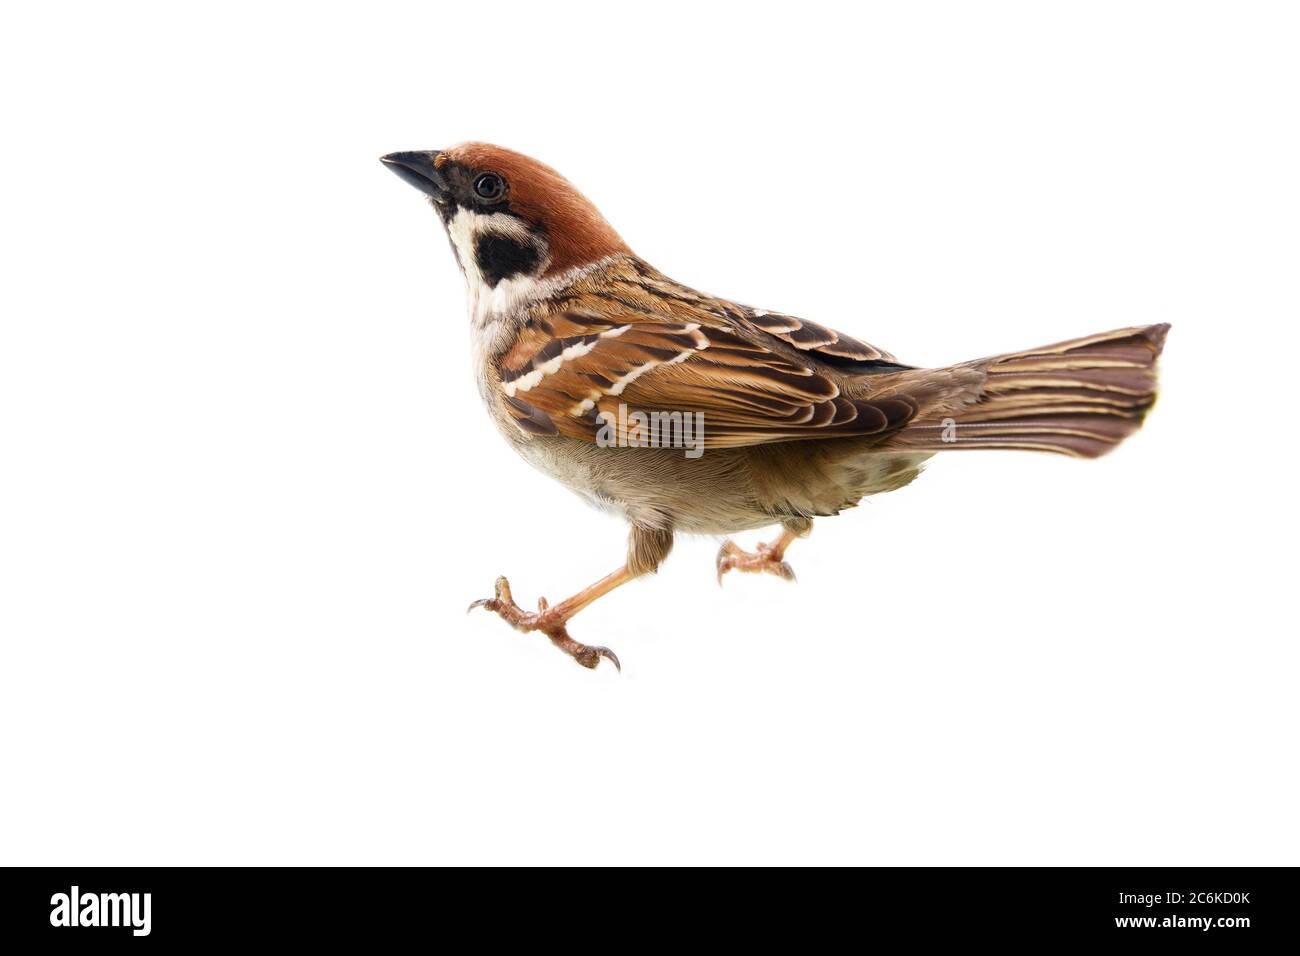 Sparrows as the most common birds in the human environment. Eurasian tree sparrow (Passer montanus) in dynamics isolated on a white background Stock Photo